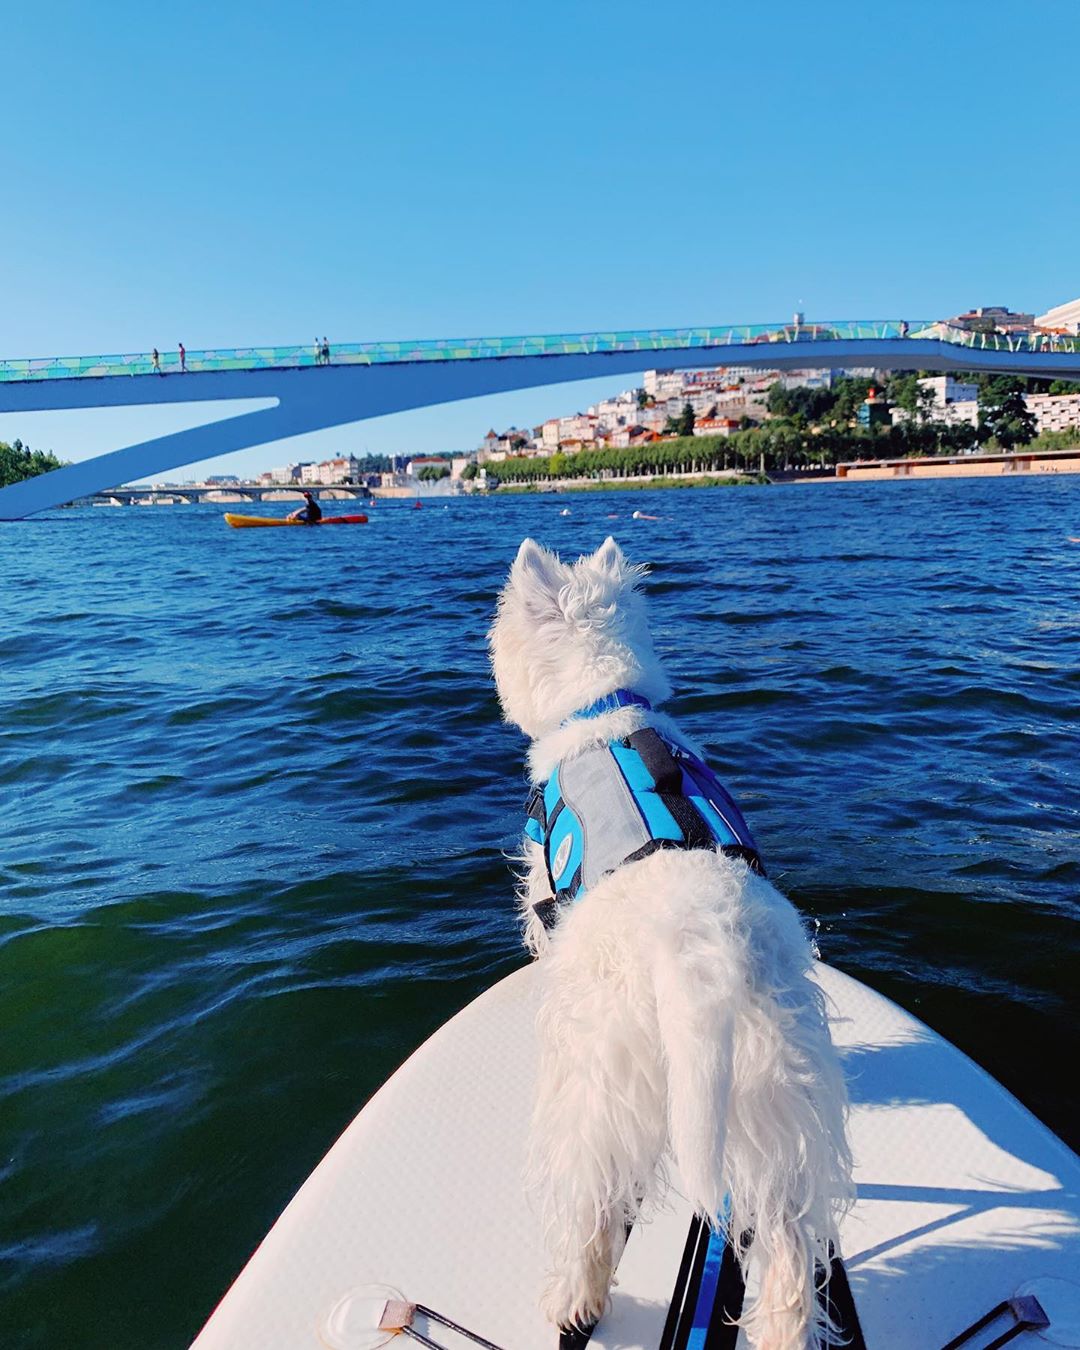 Wesite puppy in a life jacket, on a paddle board, floating on the river, looking at a bridge in the background